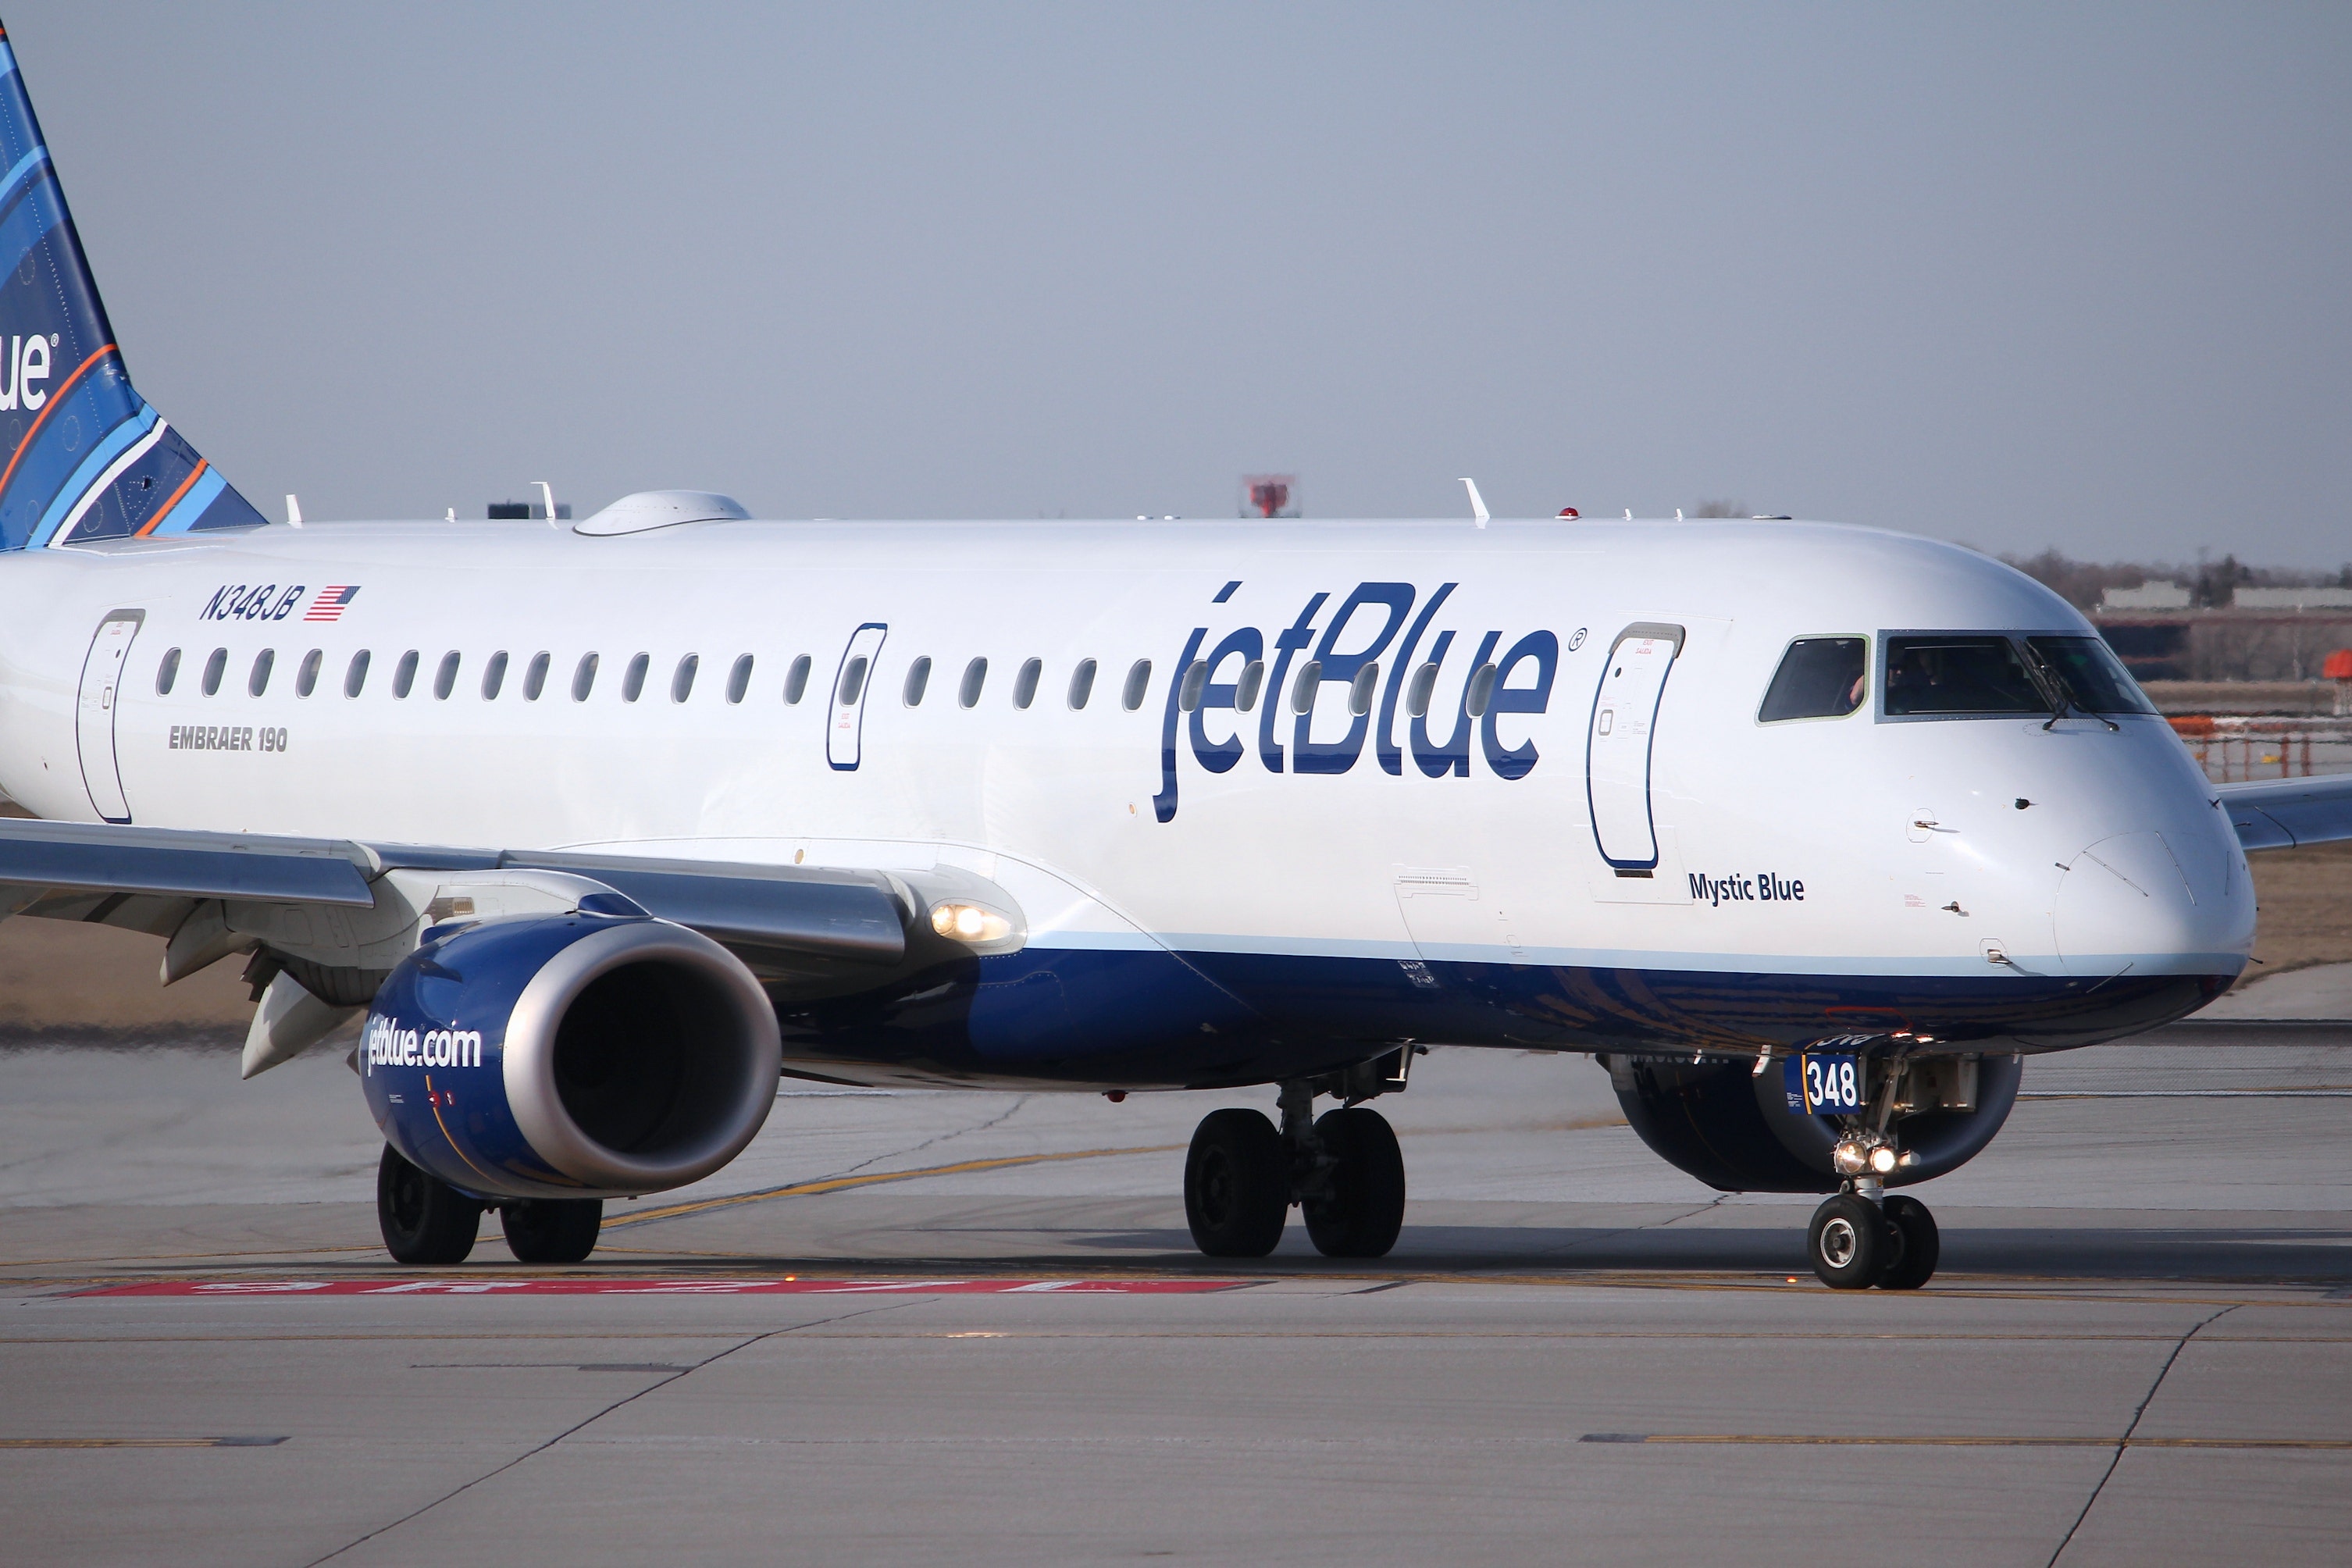 FOX NEWS: JD Power ranks JetBlue, Southwest as best in 2019 Airline Satisfaction Study